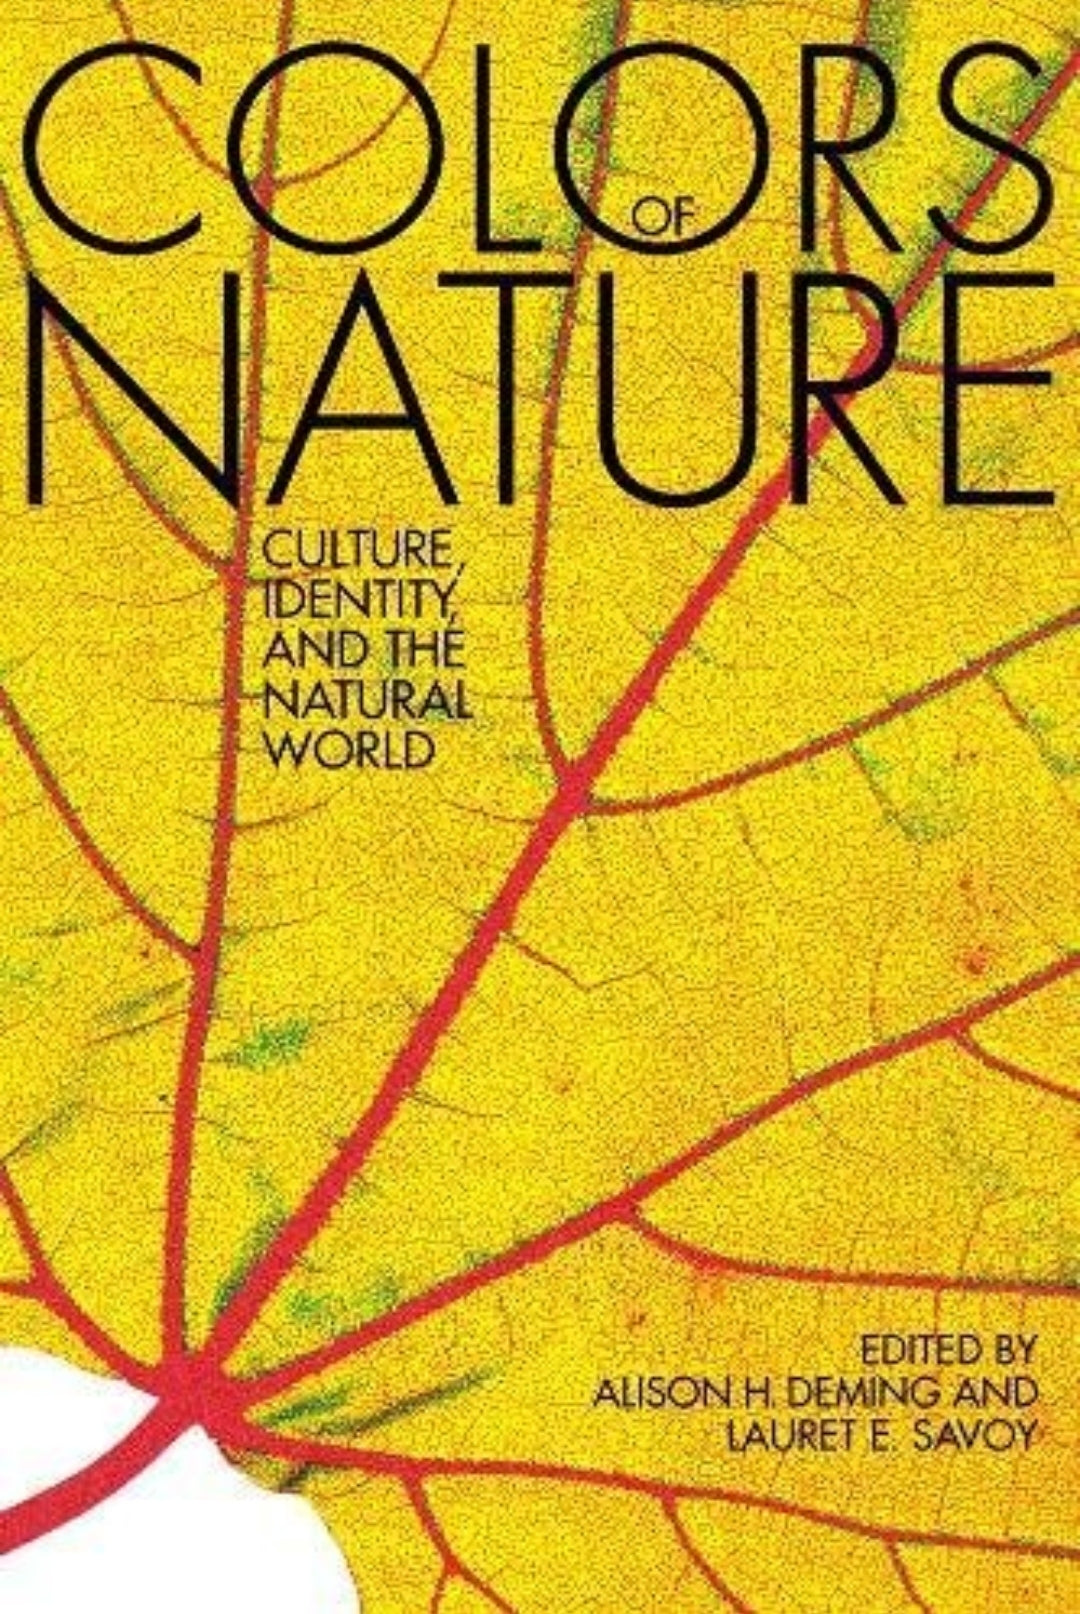 The Colors of Nature: Culture Identity And The Natural World